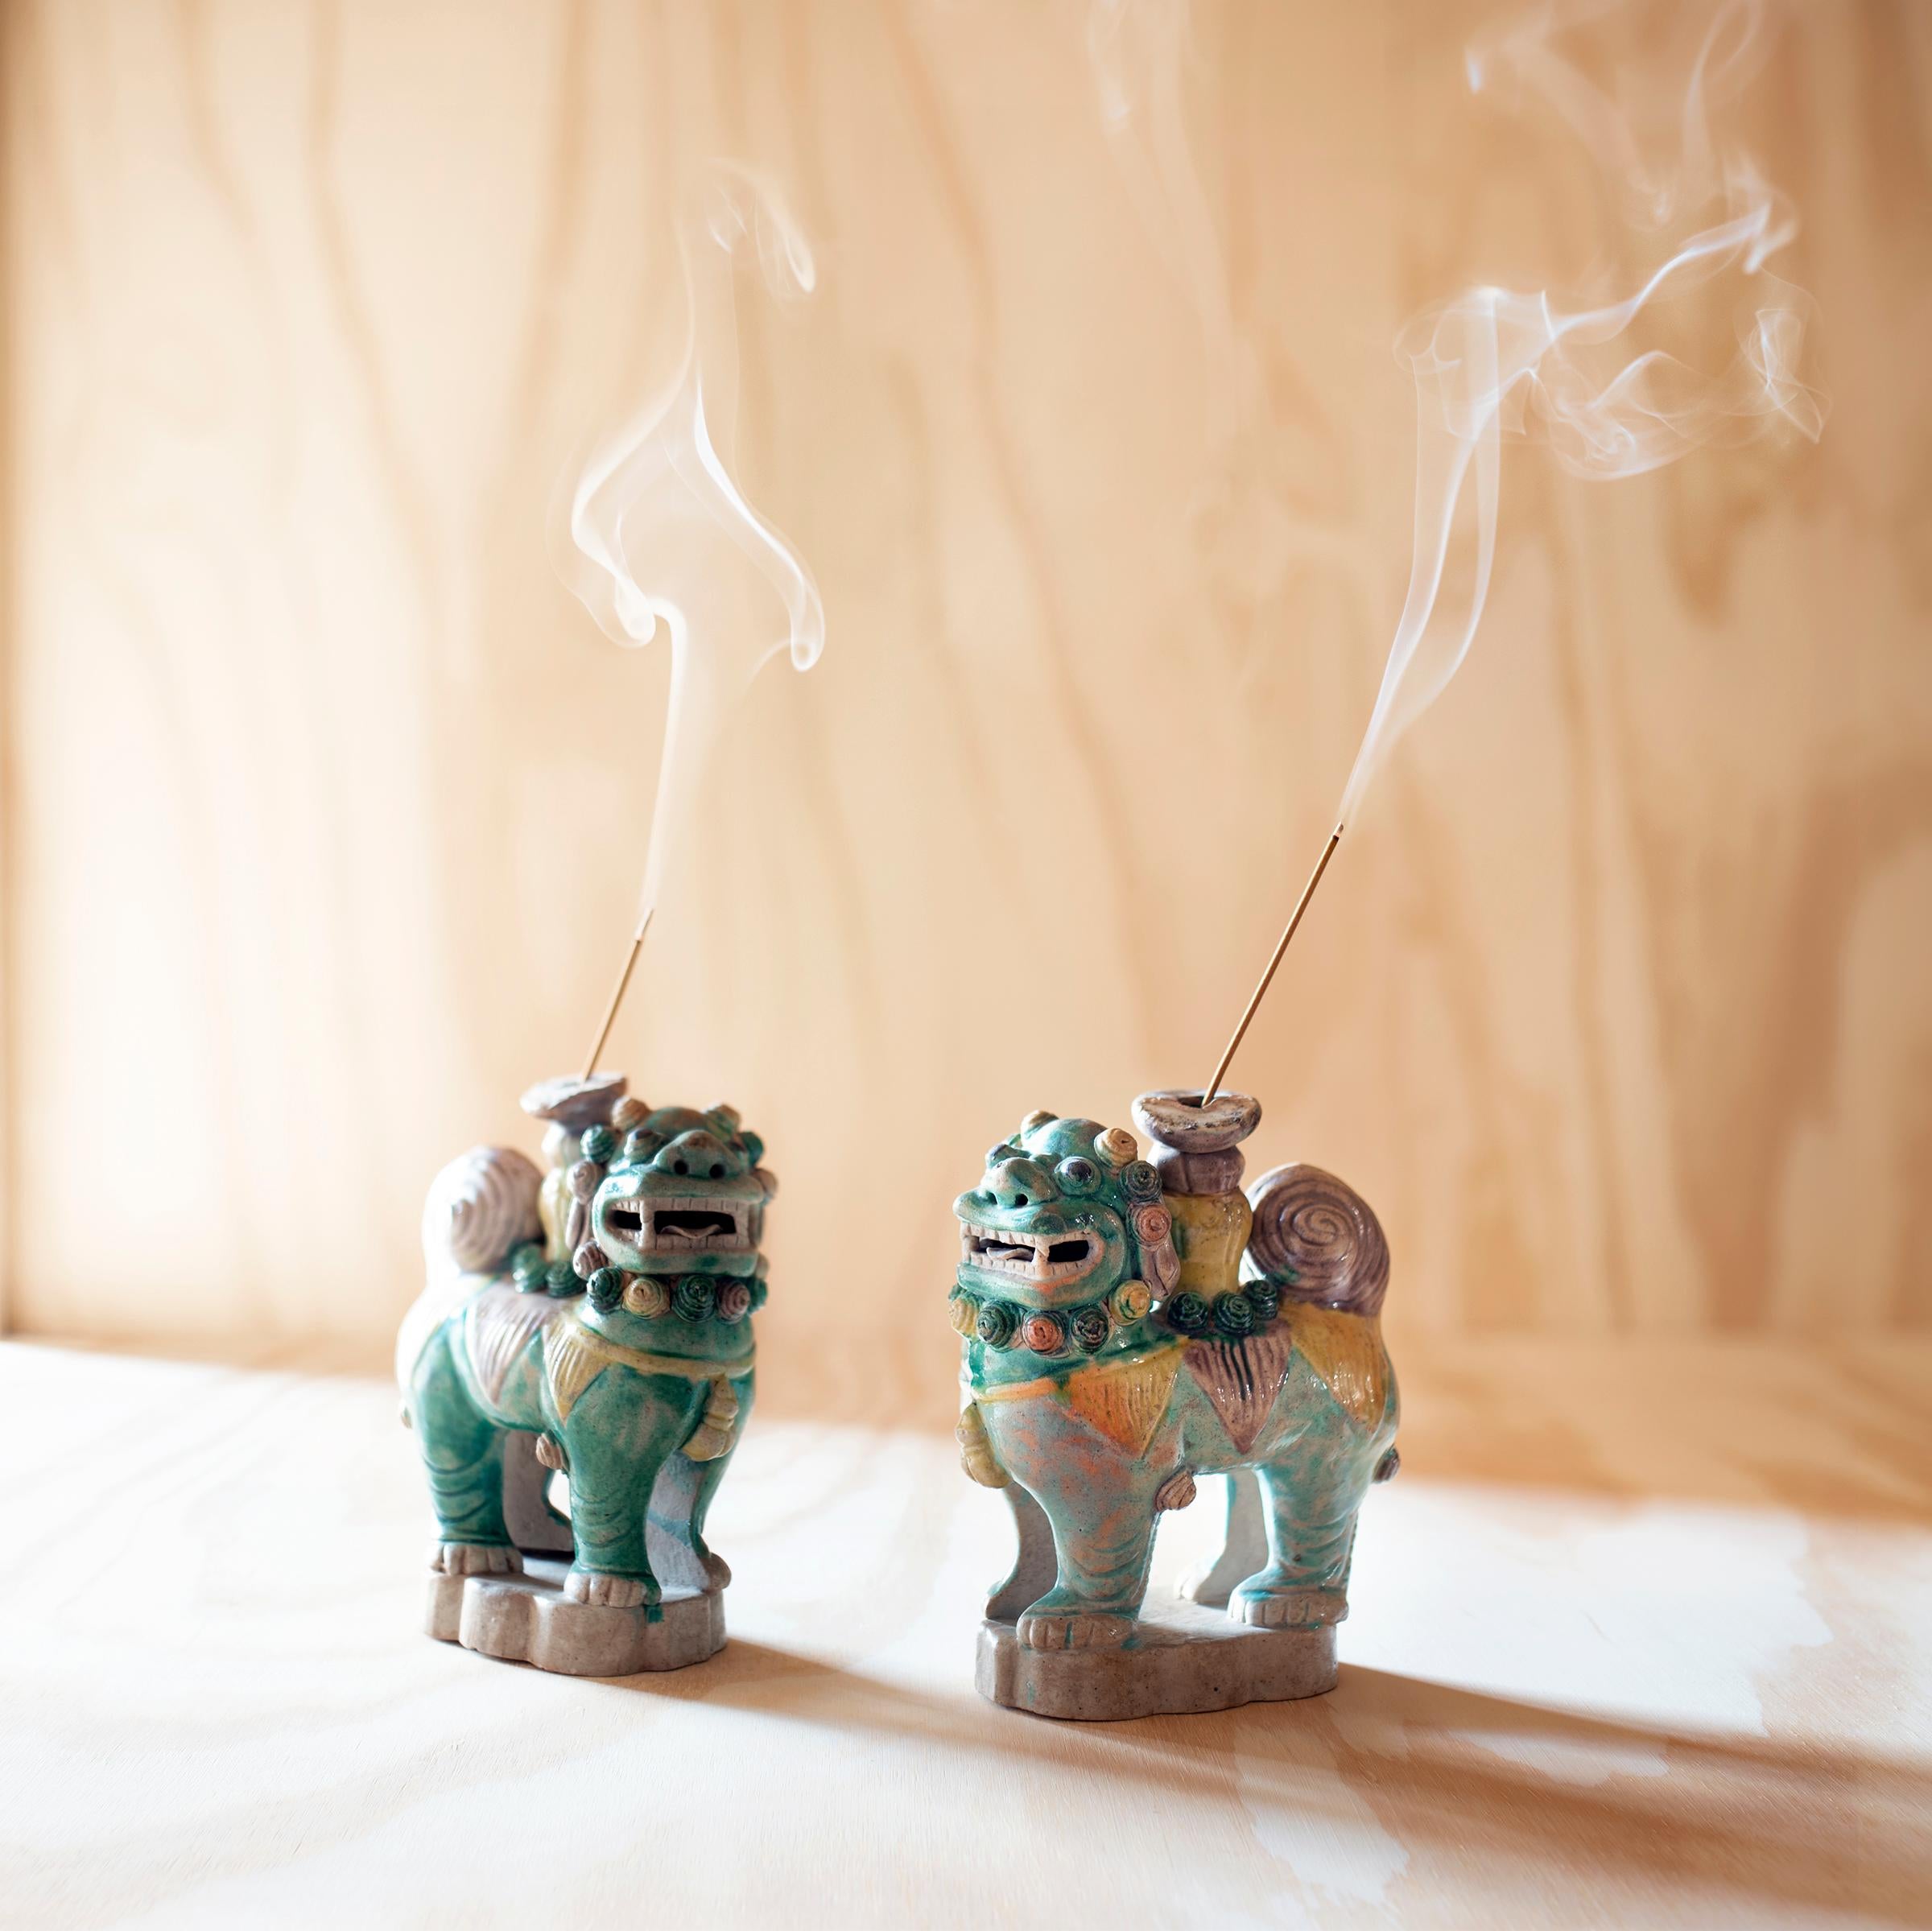 These petite ceramic fu dog figurines likely once stood upon a home altar as incense burners to accompany ritual ancestor worship. Also known as shizi, pairs of fu dog lions are believed to be benevolent protectors and are traditionally placed at